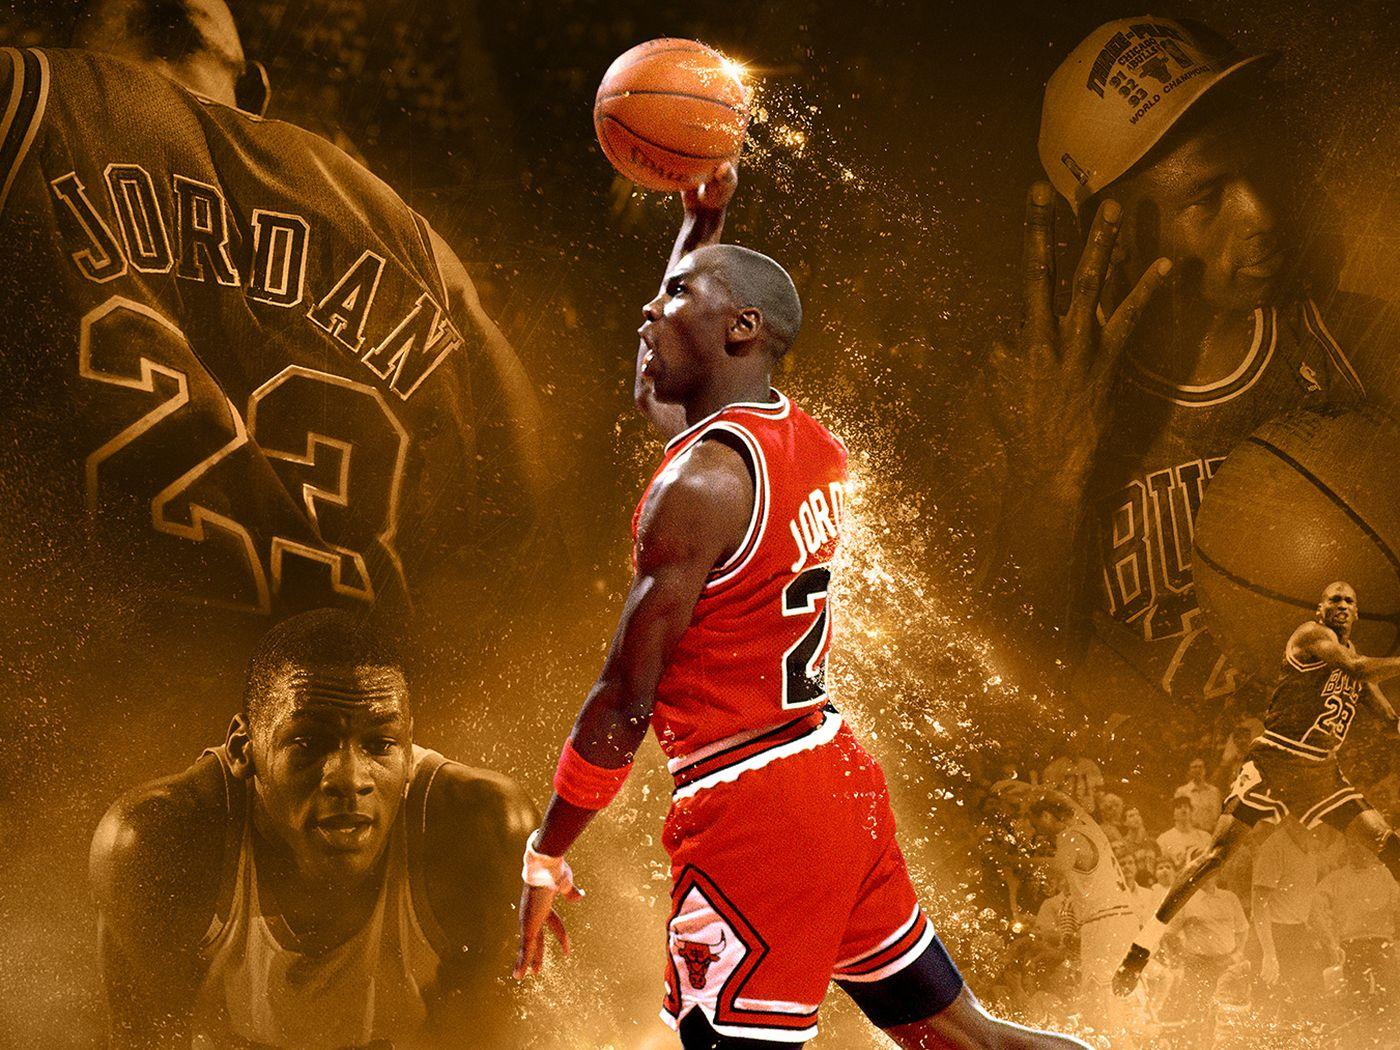 NBA 2K16 Special Edition brings back Michael Jordan on the cover